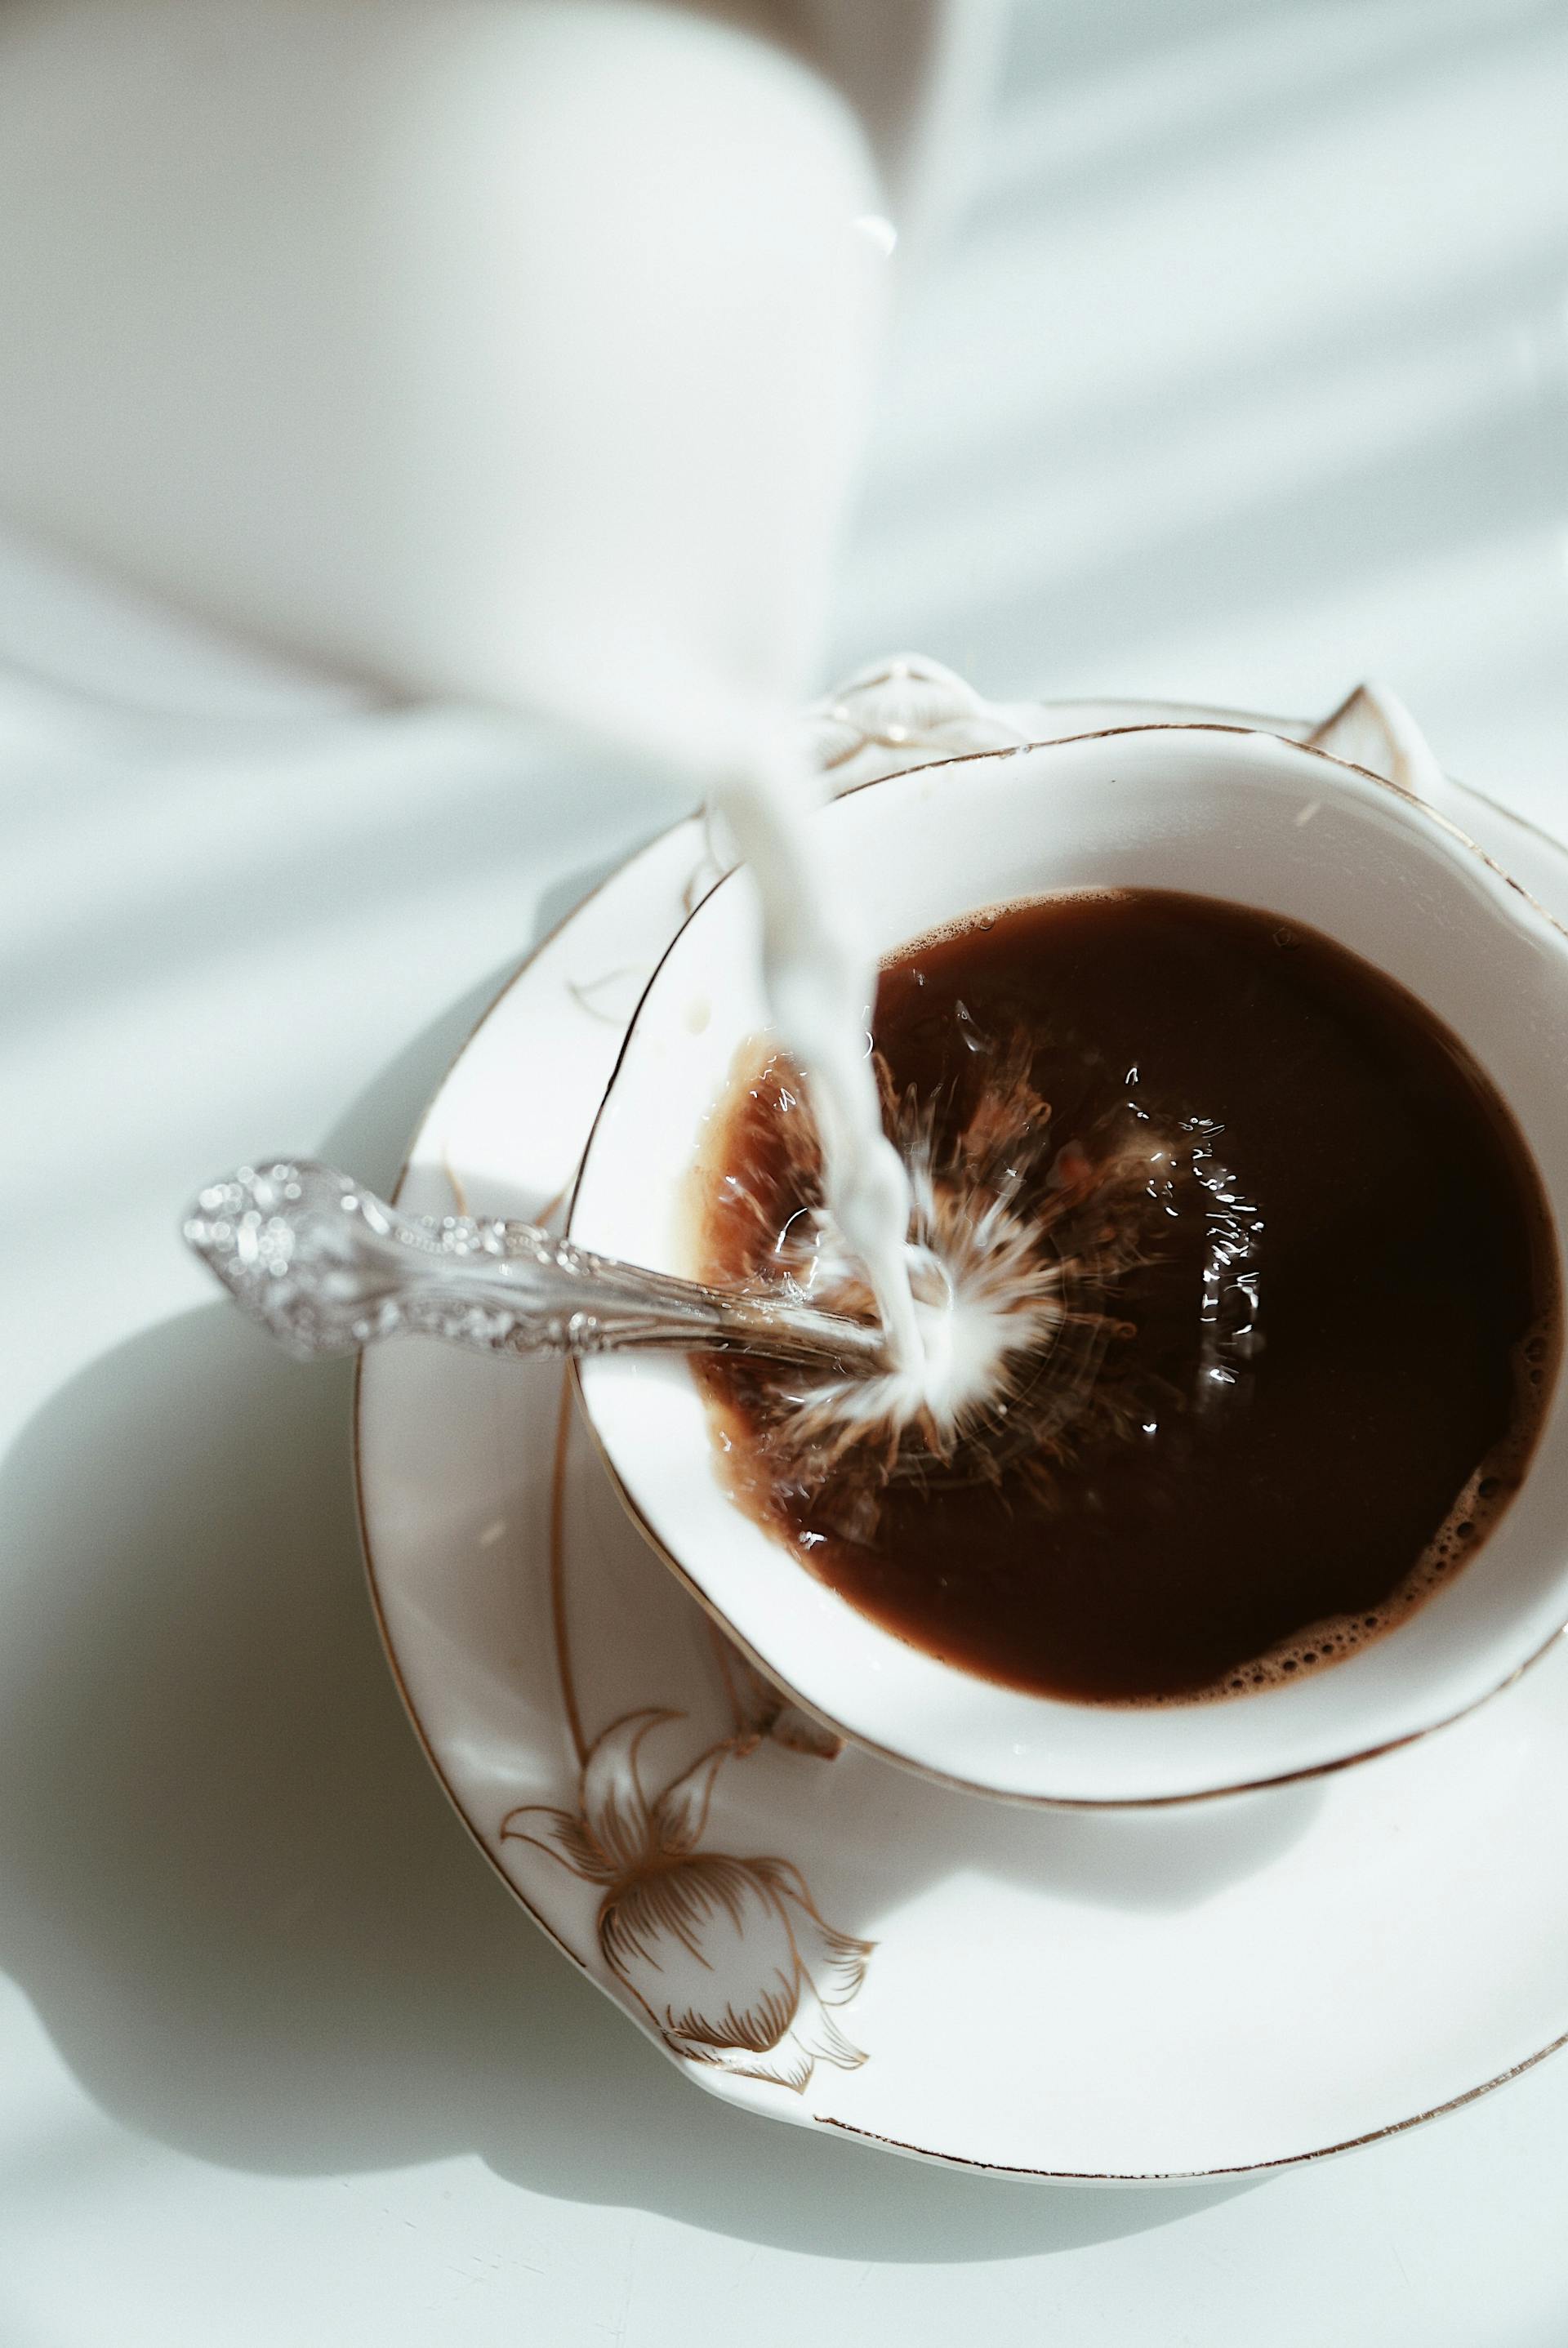 Milk being poured into coffee | Source: Pexels